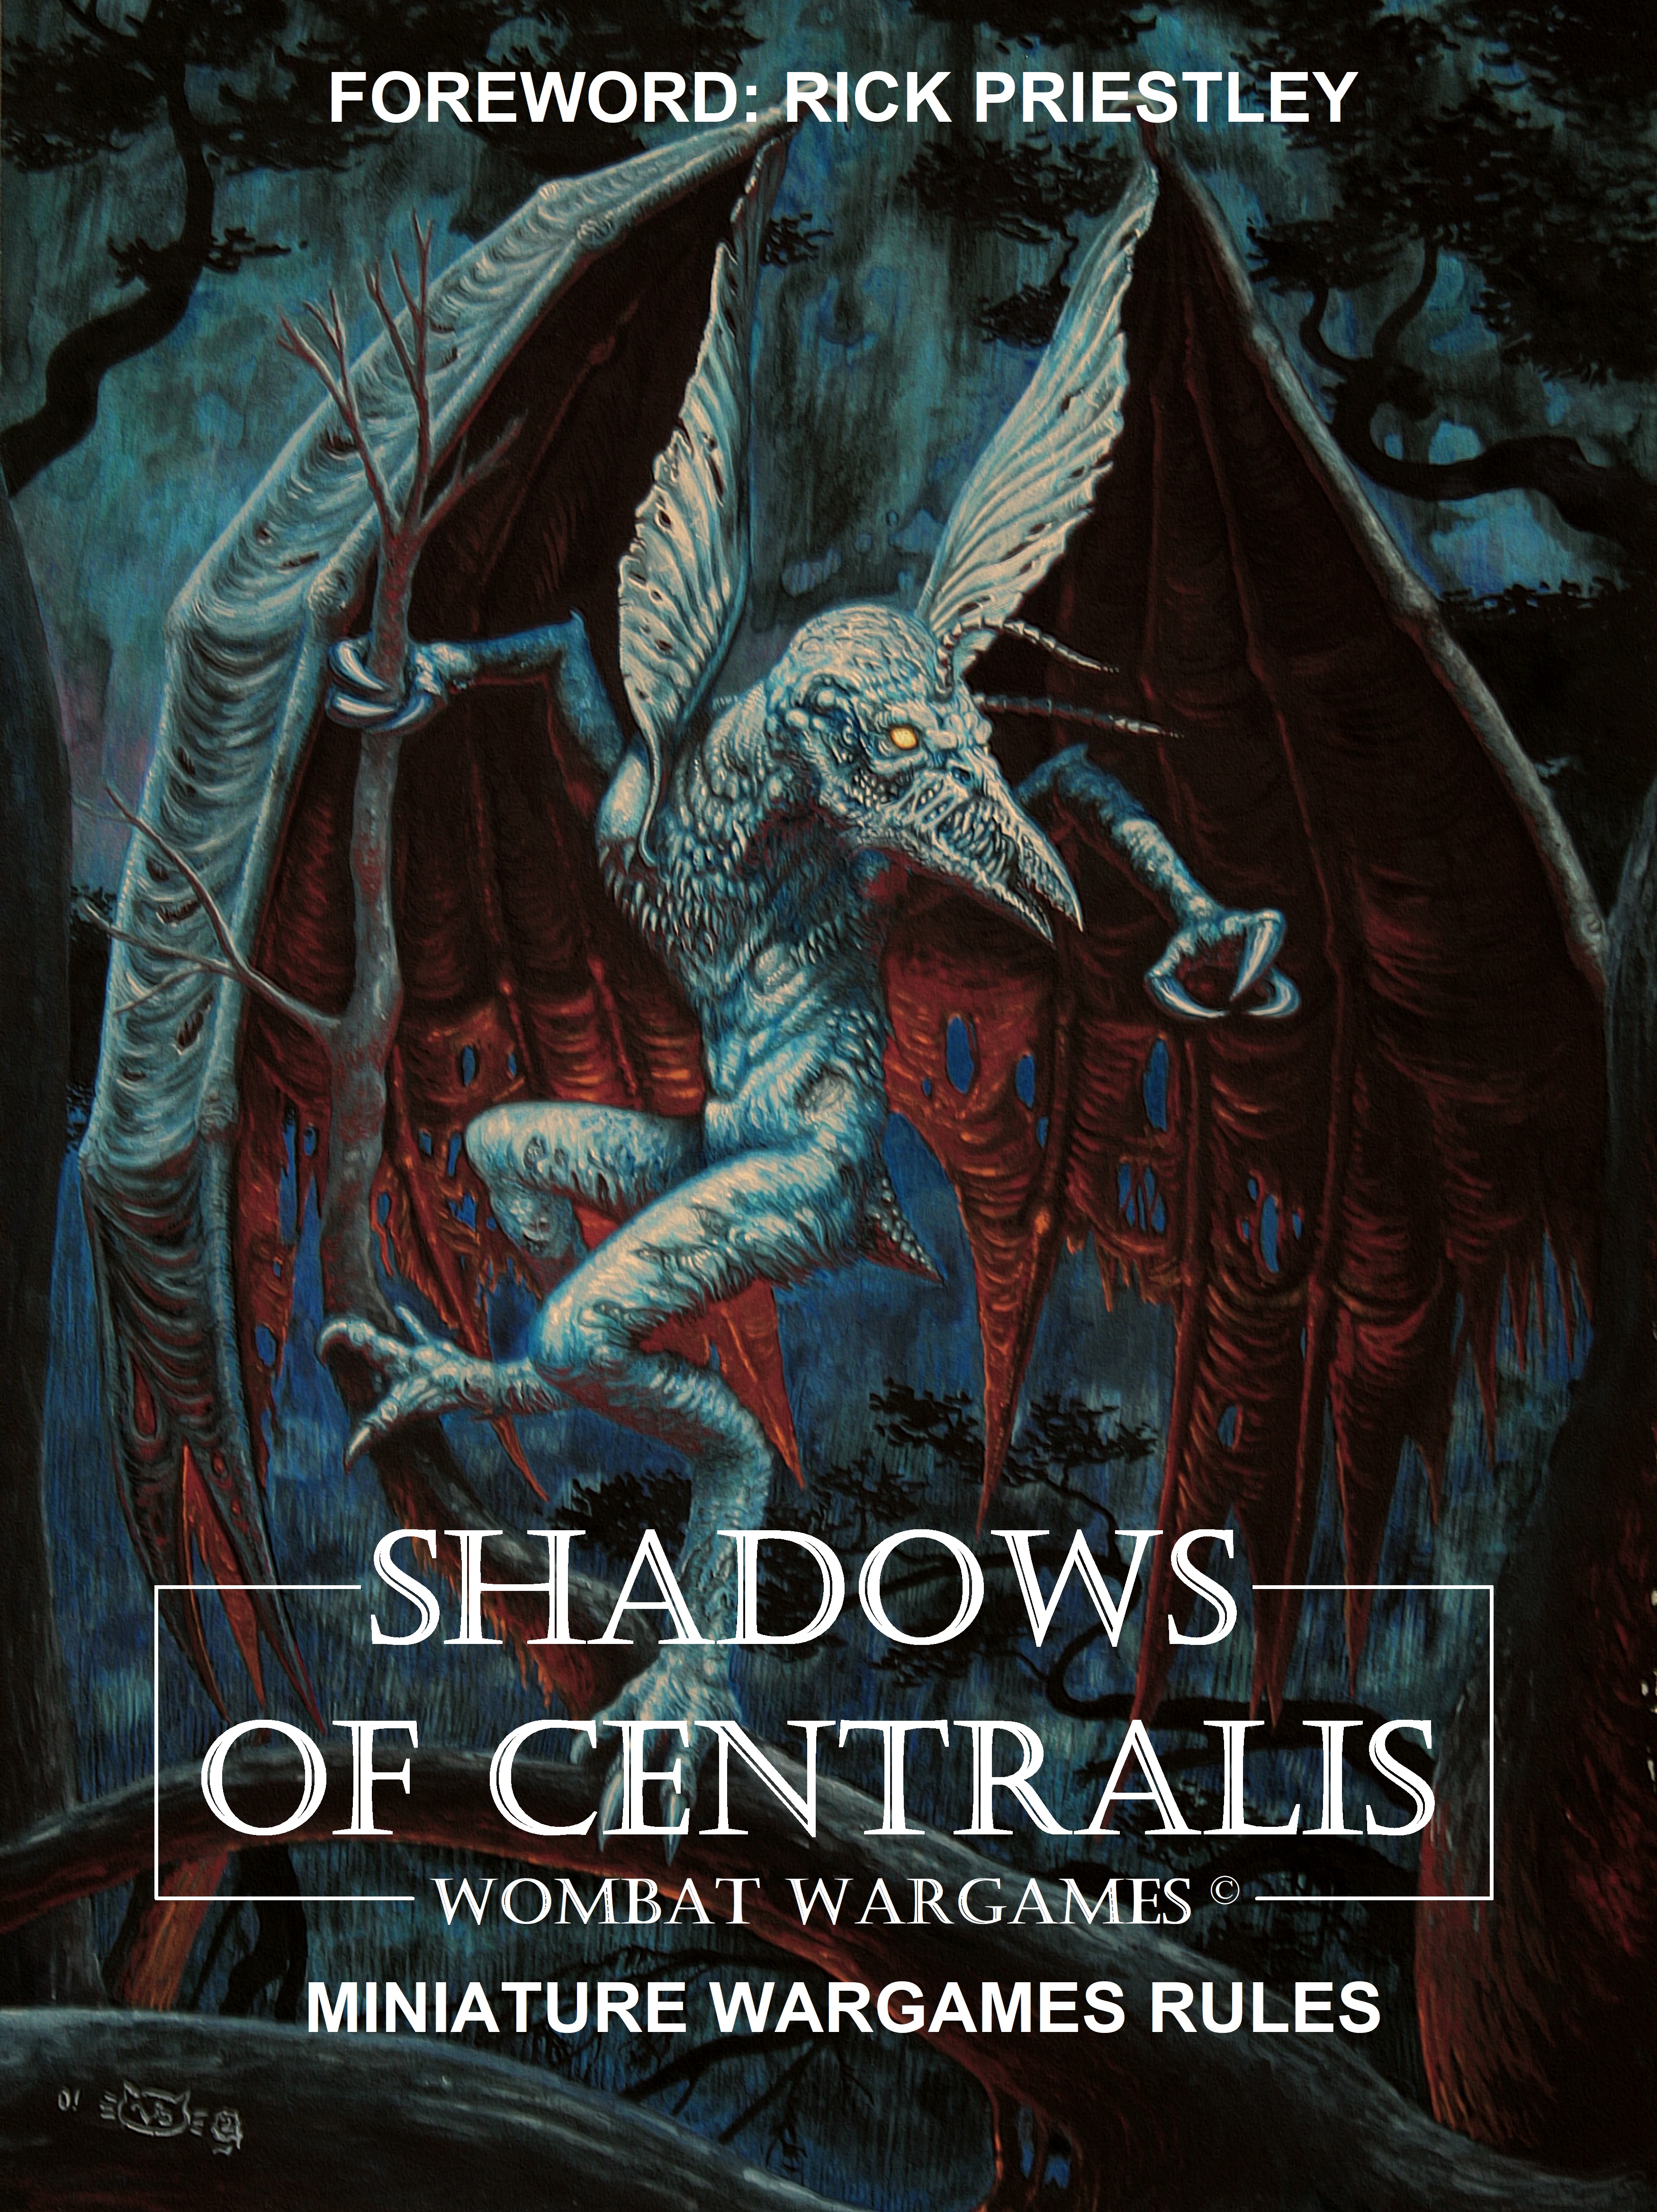 Shadows of Centralis 2nd edition by Wombat Wargames